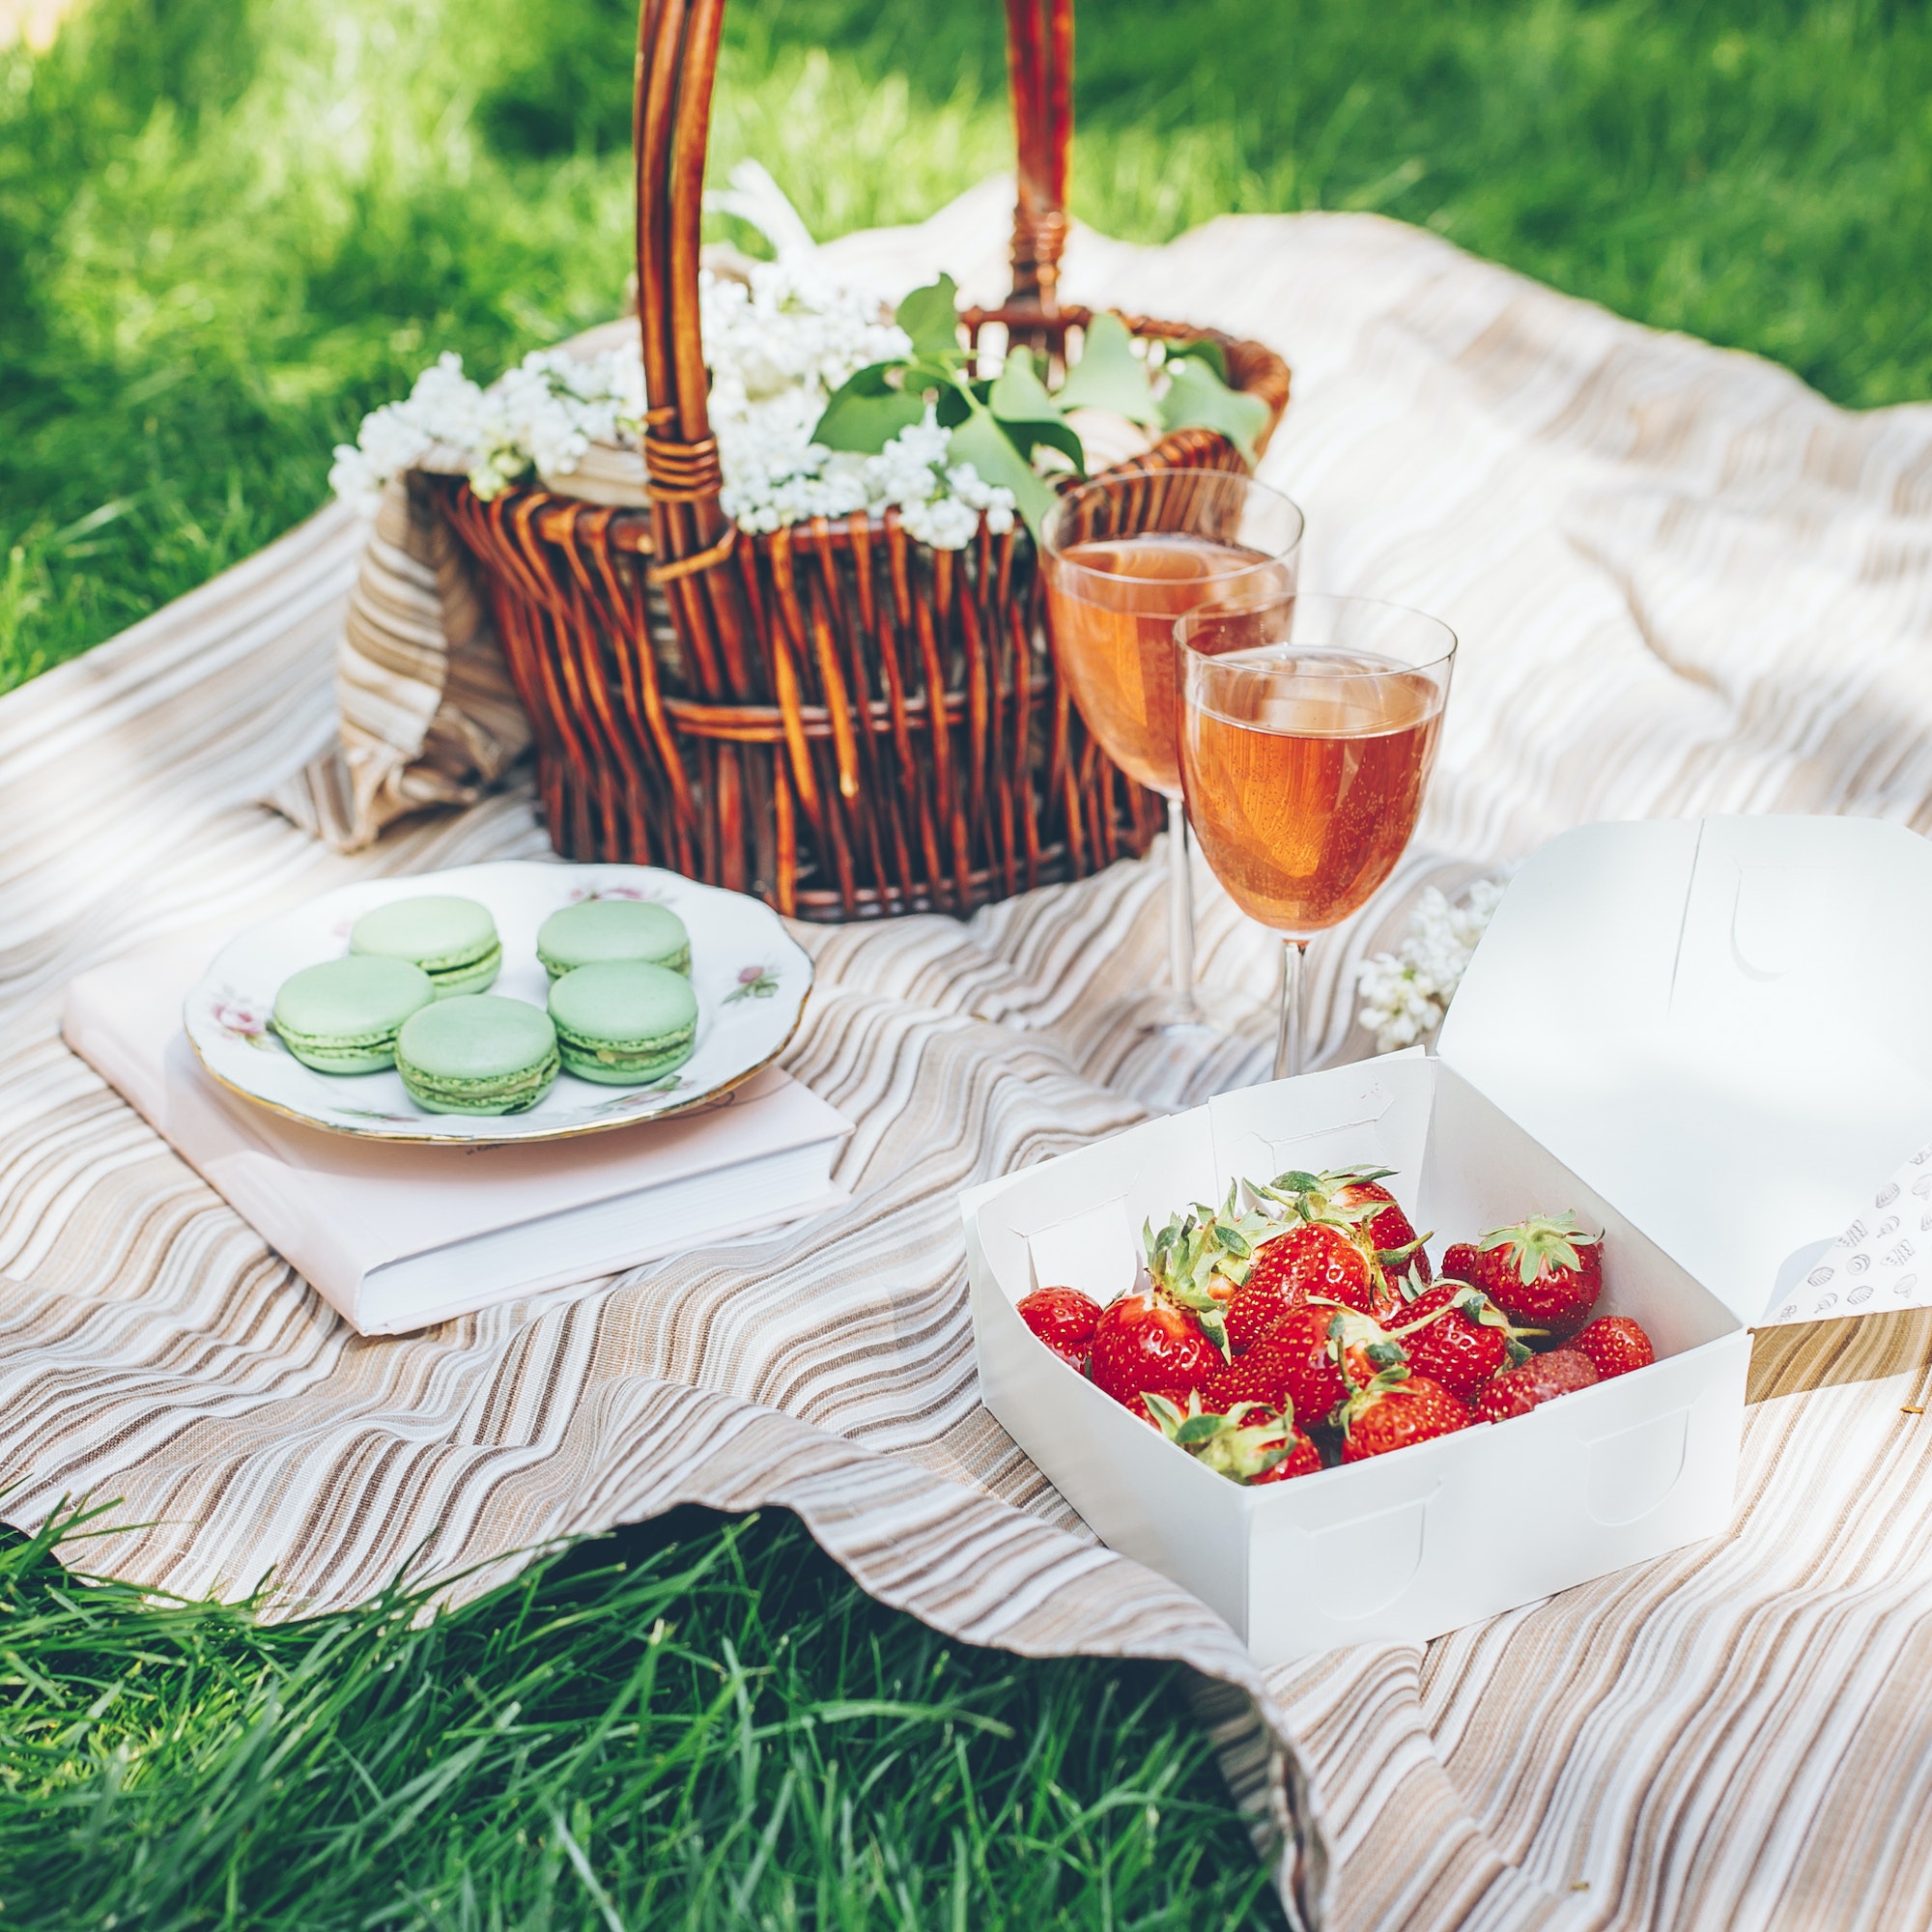 Picnic outdoor with tasty food and wine. Weekend activities, romantic surprise cozy concept